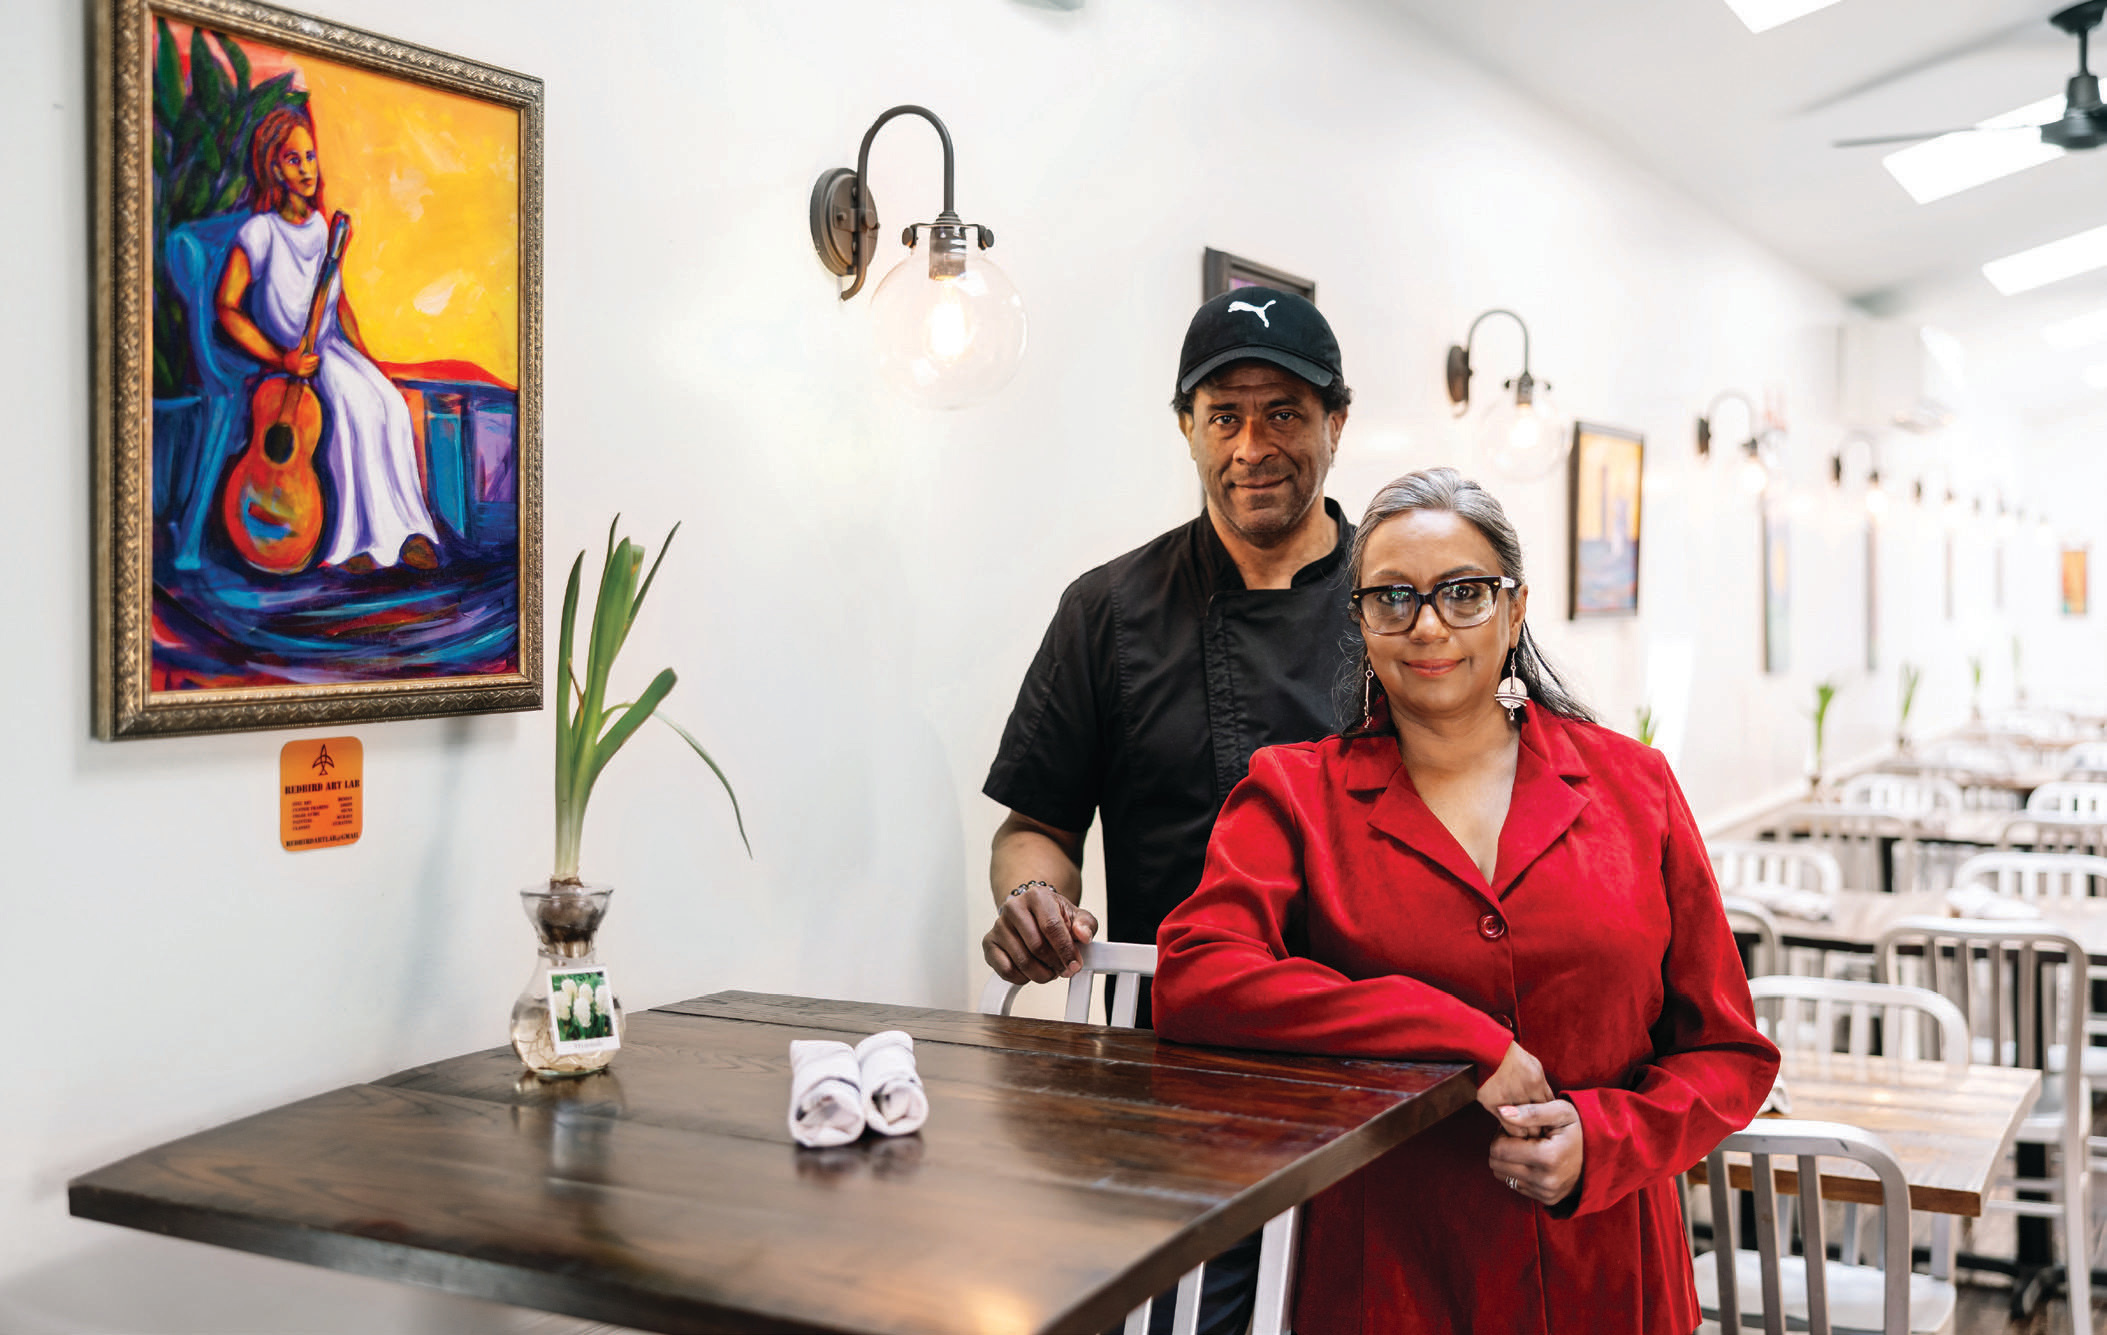 Chef Marc-Antony Williams and partner Suzette “Q” Singh feel right at home in historic New Castle, where residents and tourists come for the live music, the art and the cuisine, which fuses multiple cultures.